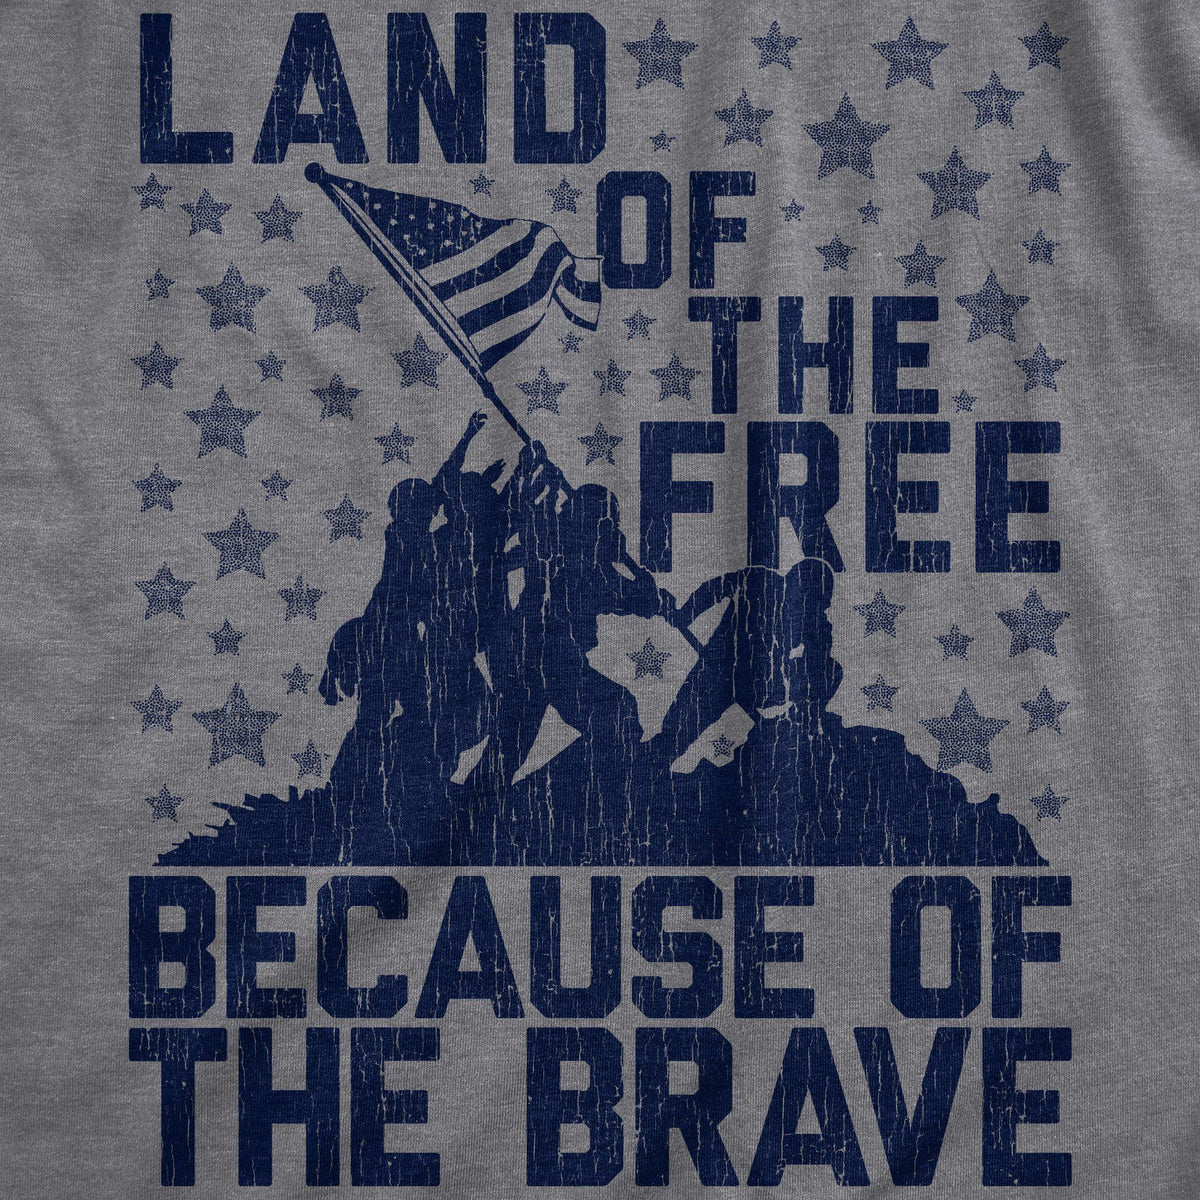 Land Of The Free Because Of The Brave Men&#39;s Tshirt - Crazy Dog T-Shirts